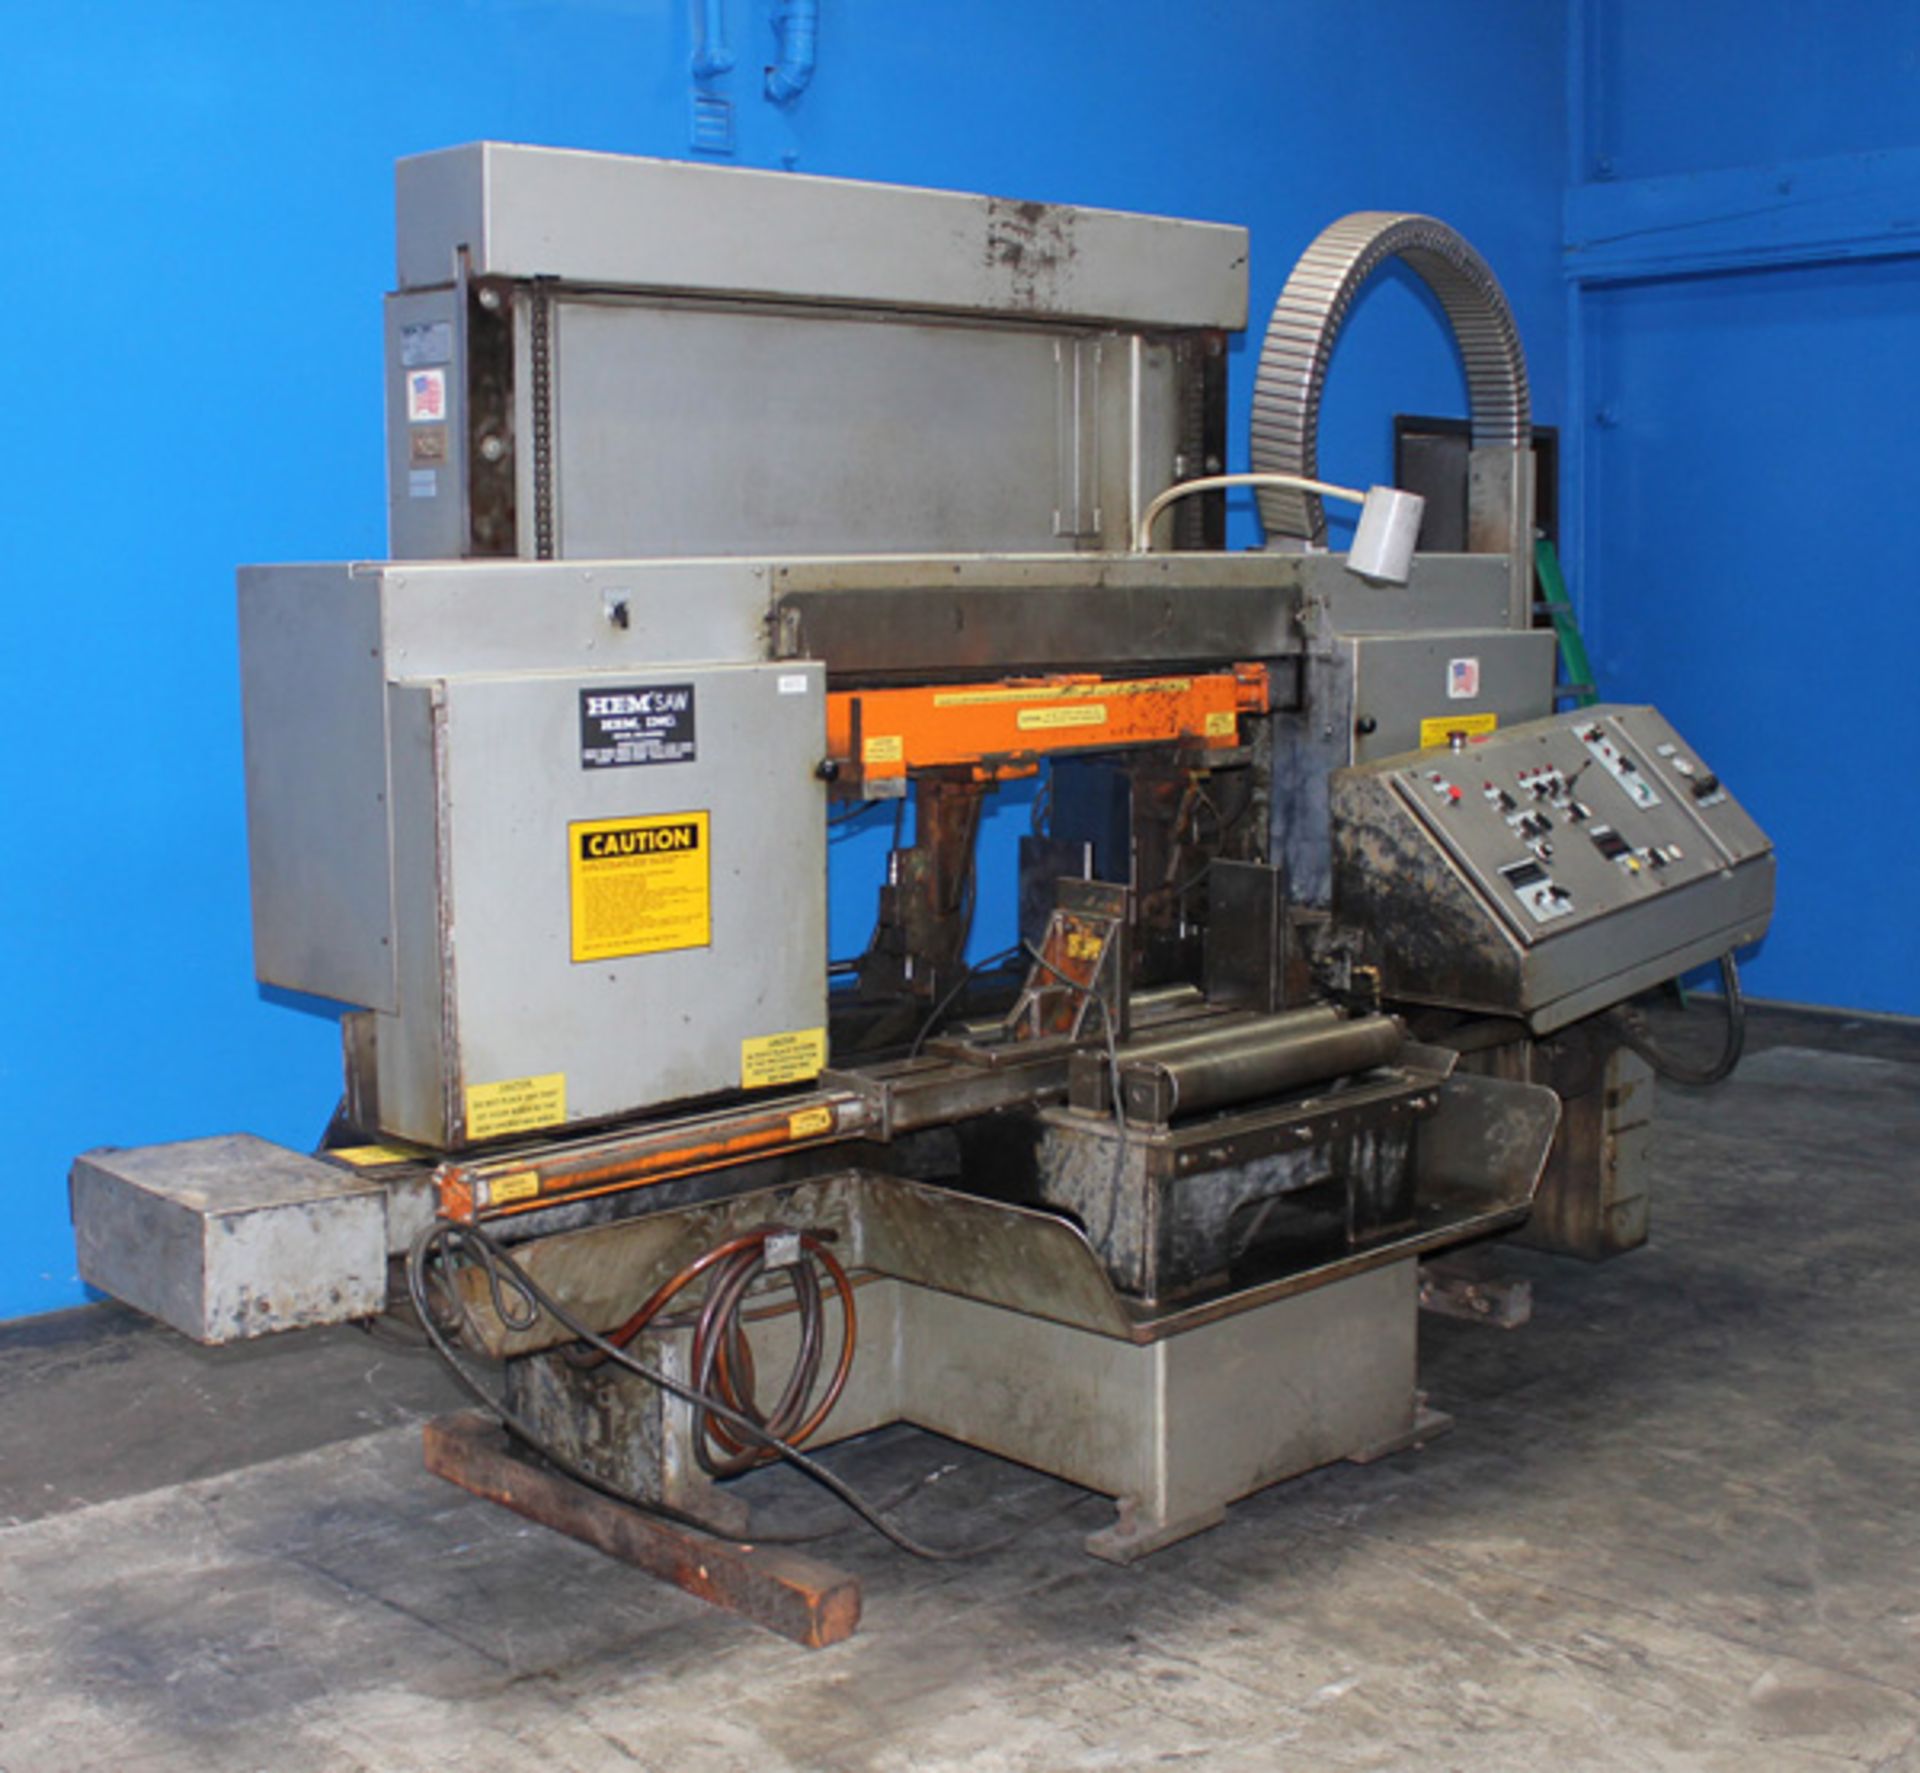 1996 HEM Semi-Automatic Horizontal Bandsaw, 18" x 20", Mdl: H130 HM- DC, S/N: 524196, Located In: - Image 5 of 8